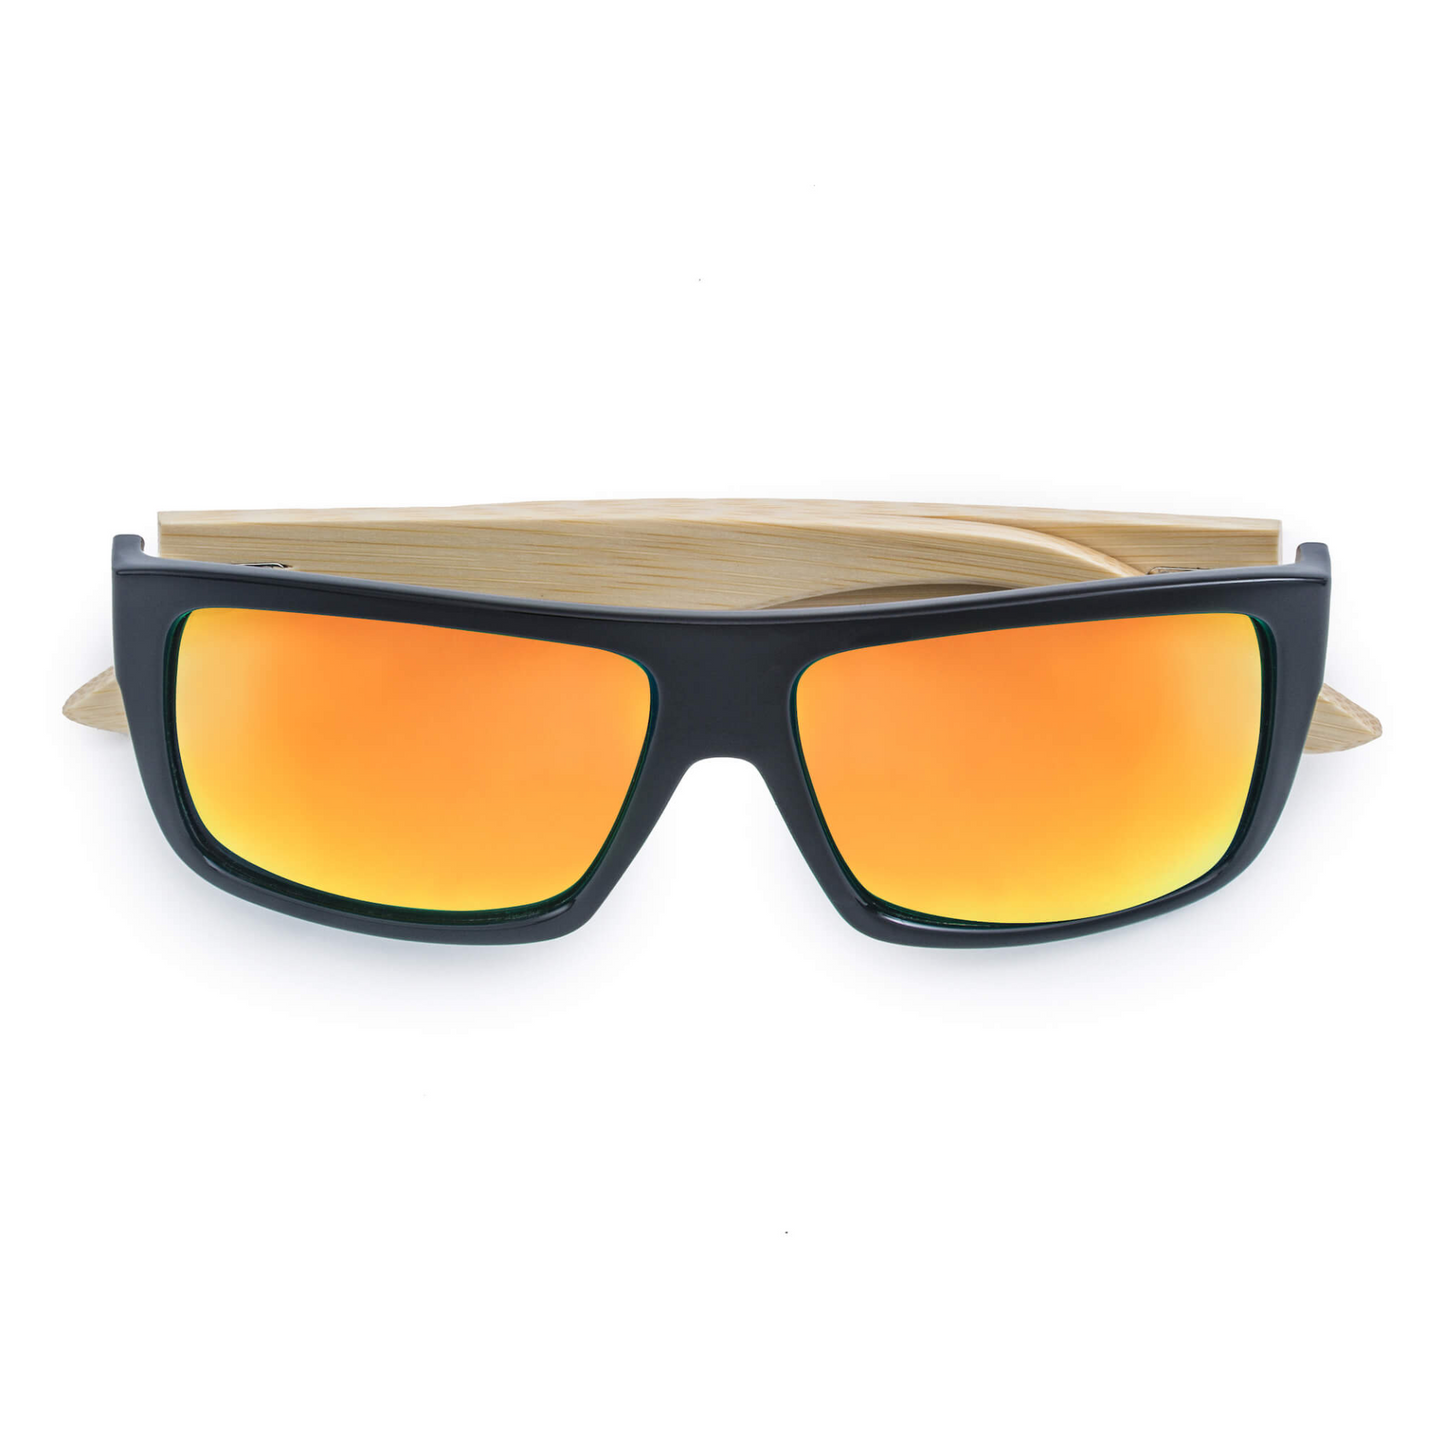 Sport Bamboo Sunglasses with Yellow Lens